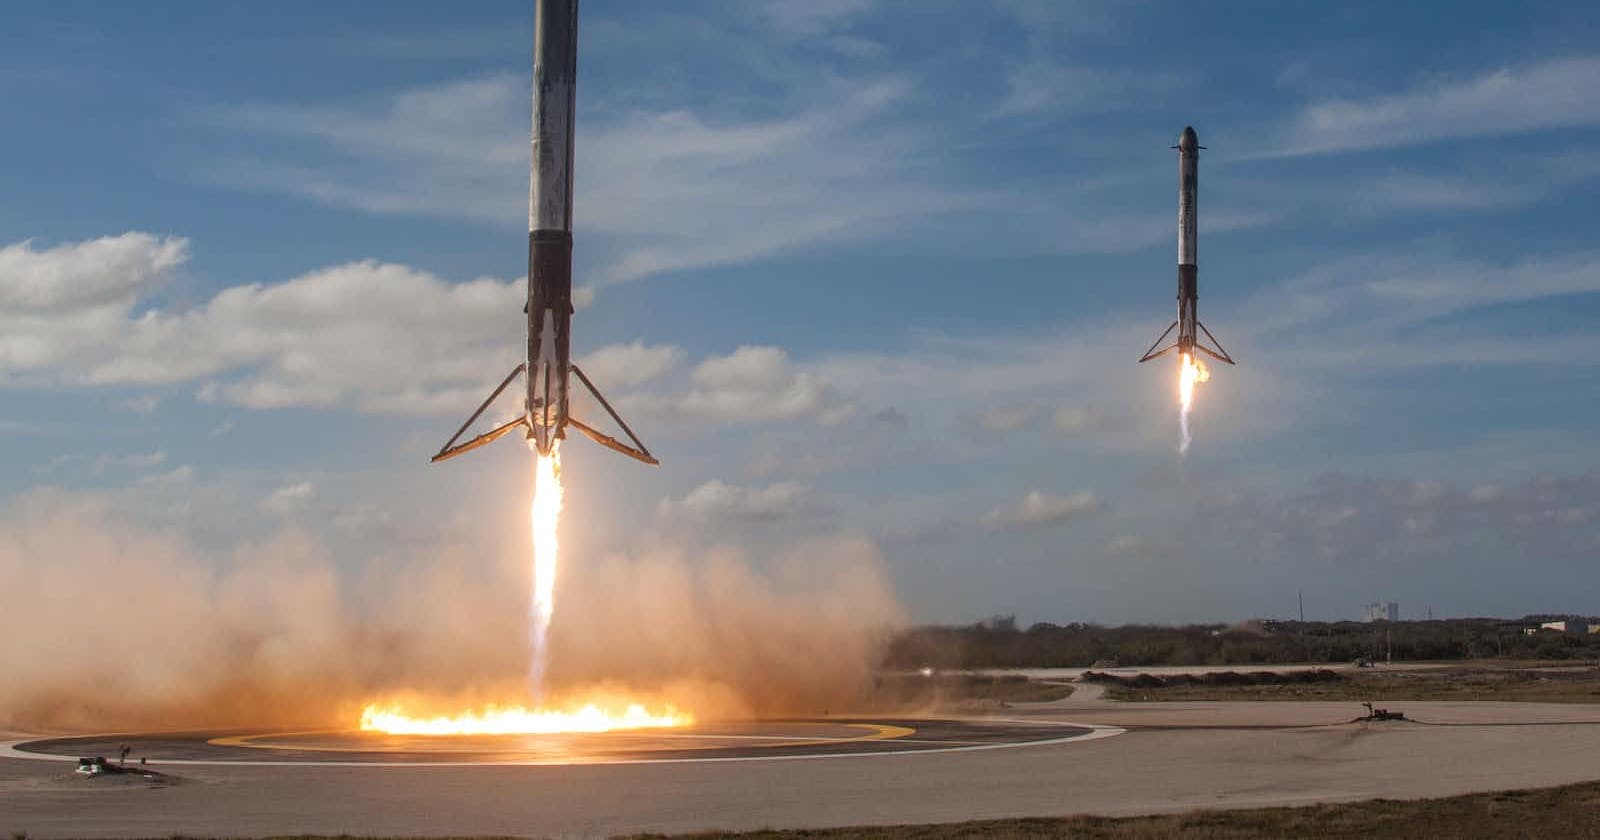 How is SpaceX preparing to go to Mars this decade?